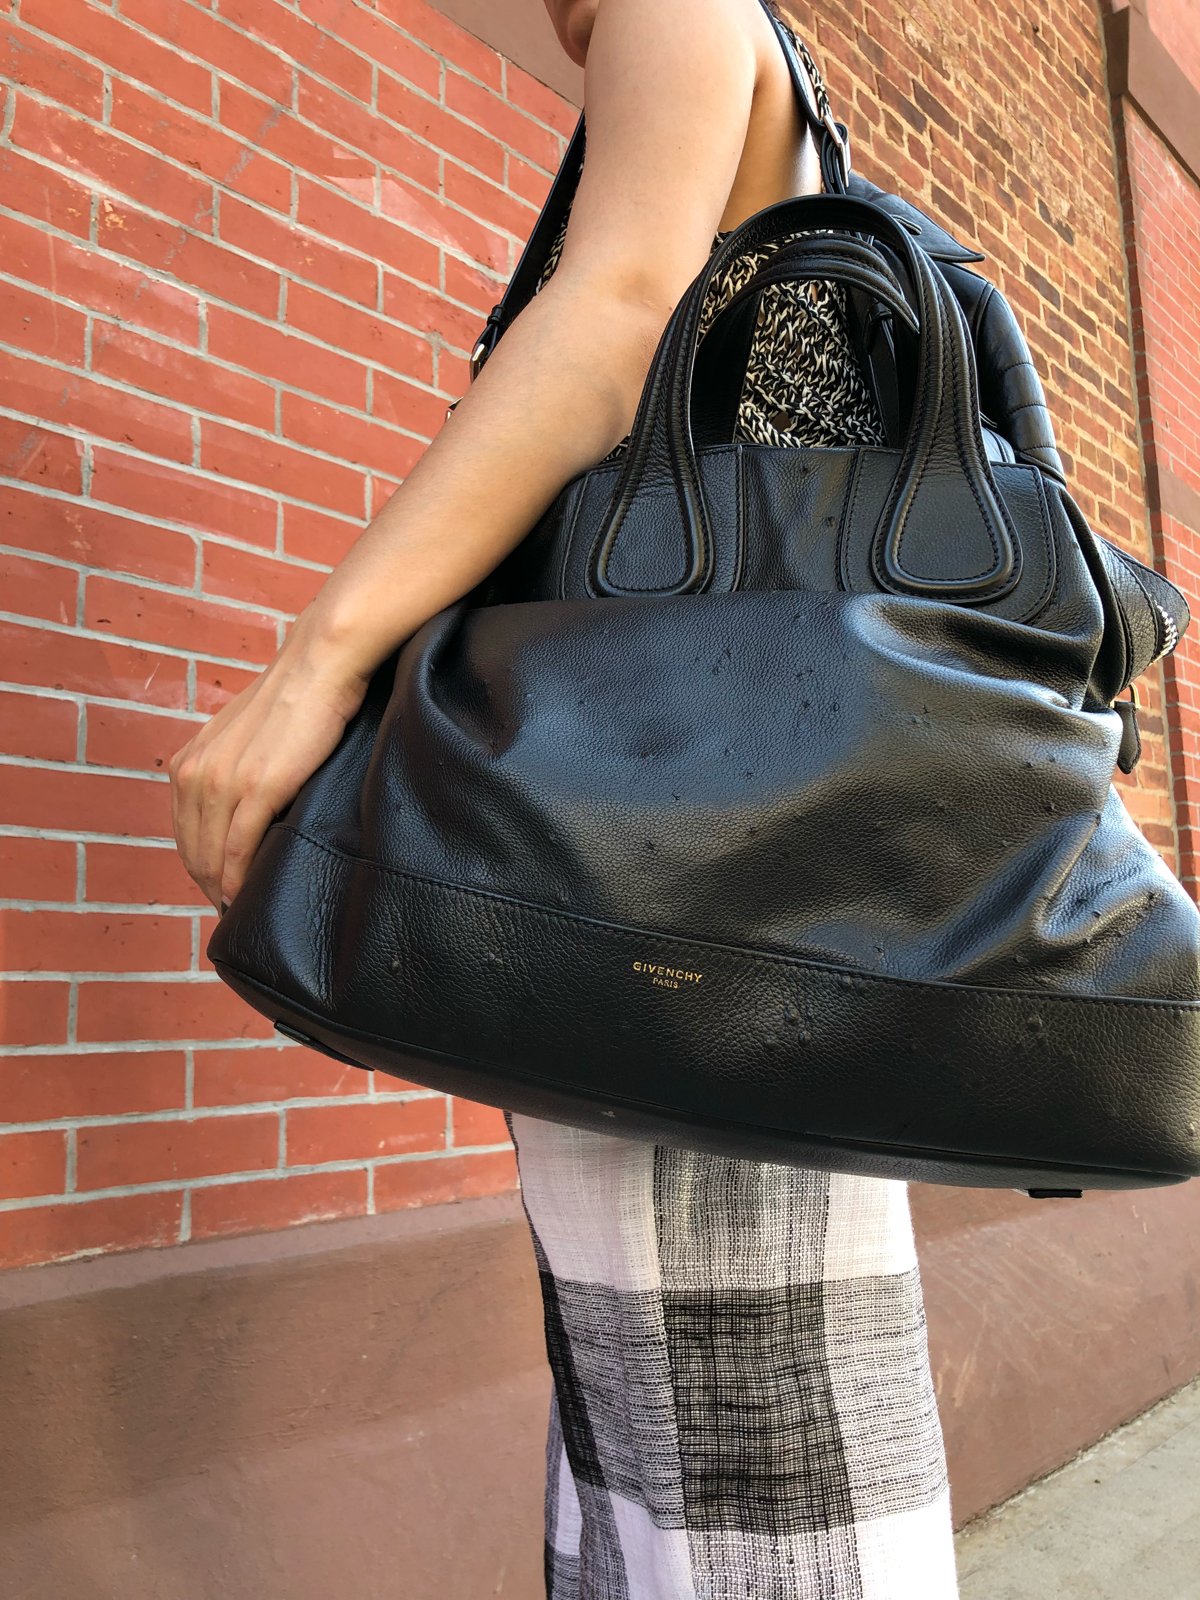 GIVENCHY NIGHTINGALE BAG | Trunk Show Designer Consignment